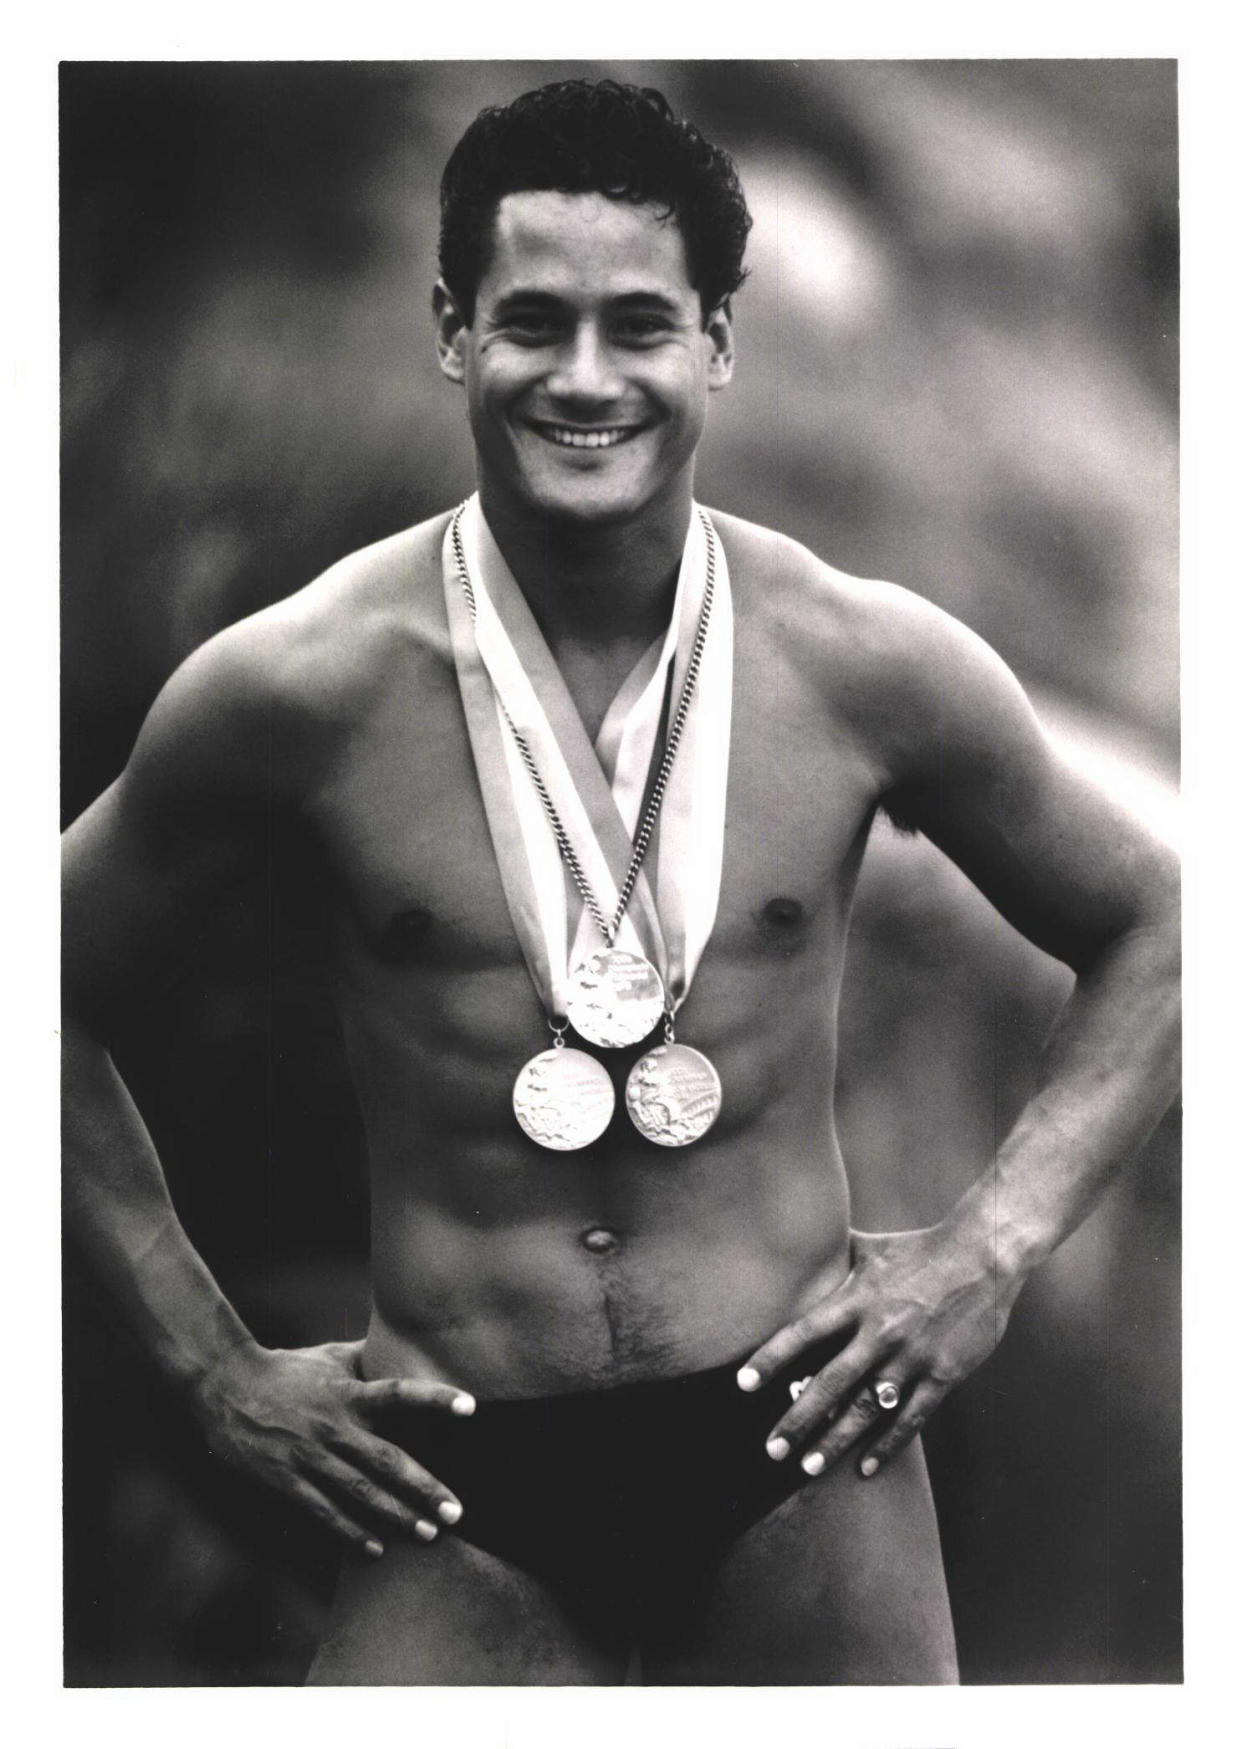 Olympian Greg Louganis posing with his two gold medals and silver medal. (Greg Louganis)